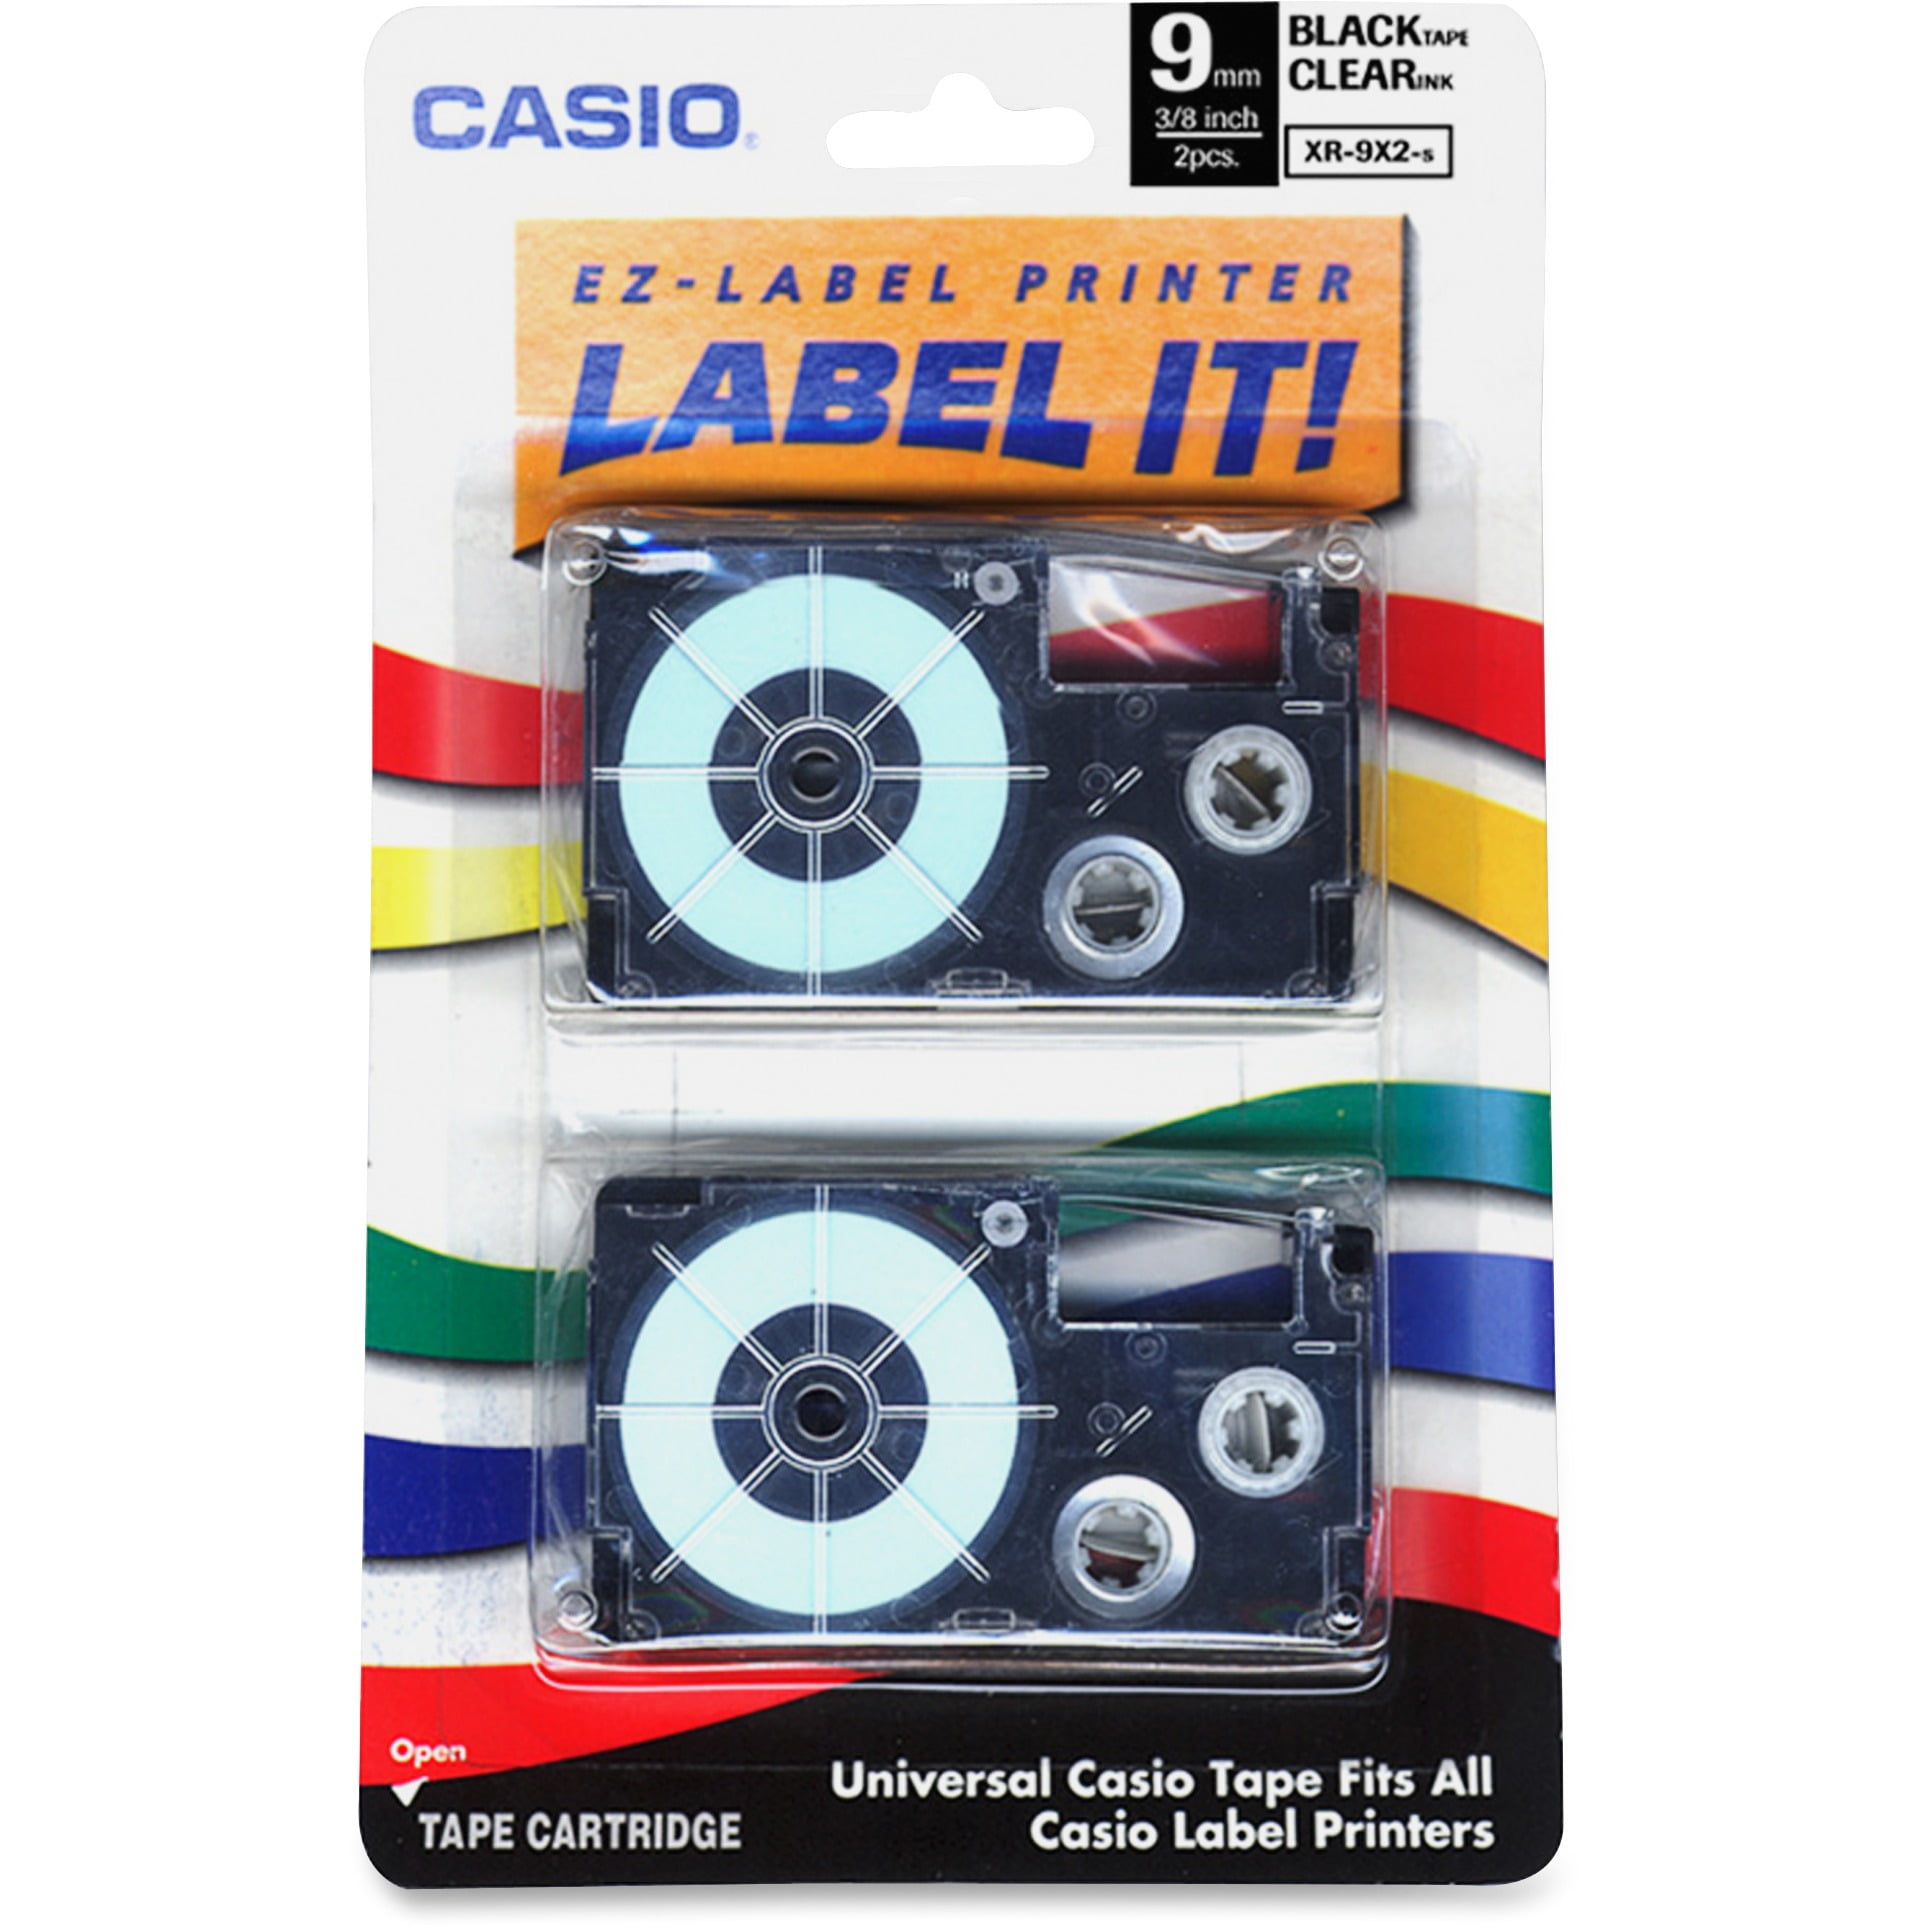 Details about   2pcs/kits Black On White 9mm Label Tape AR-9WE Equipment Replaced For Casio 